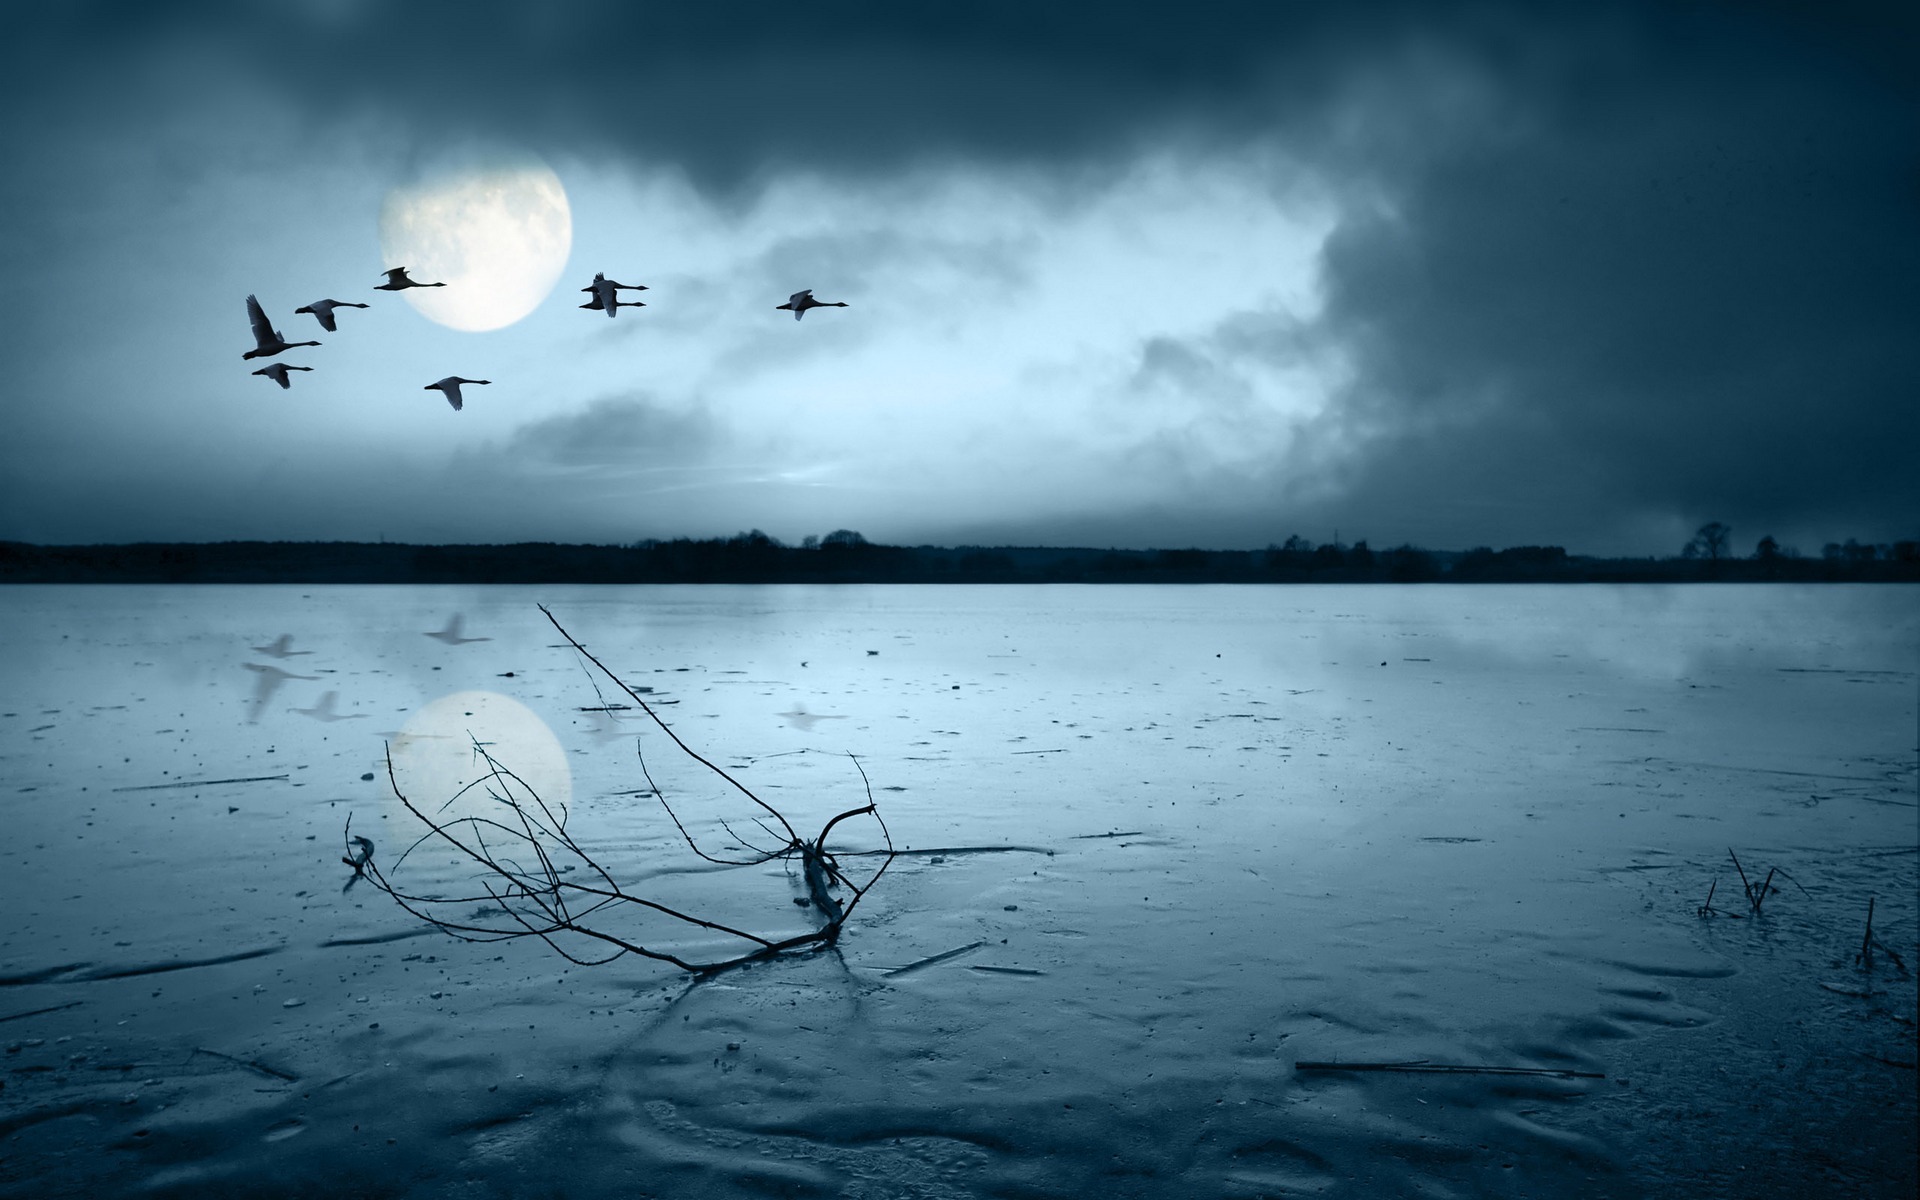 Ducks flying at night on lake | Imagesfreeextra